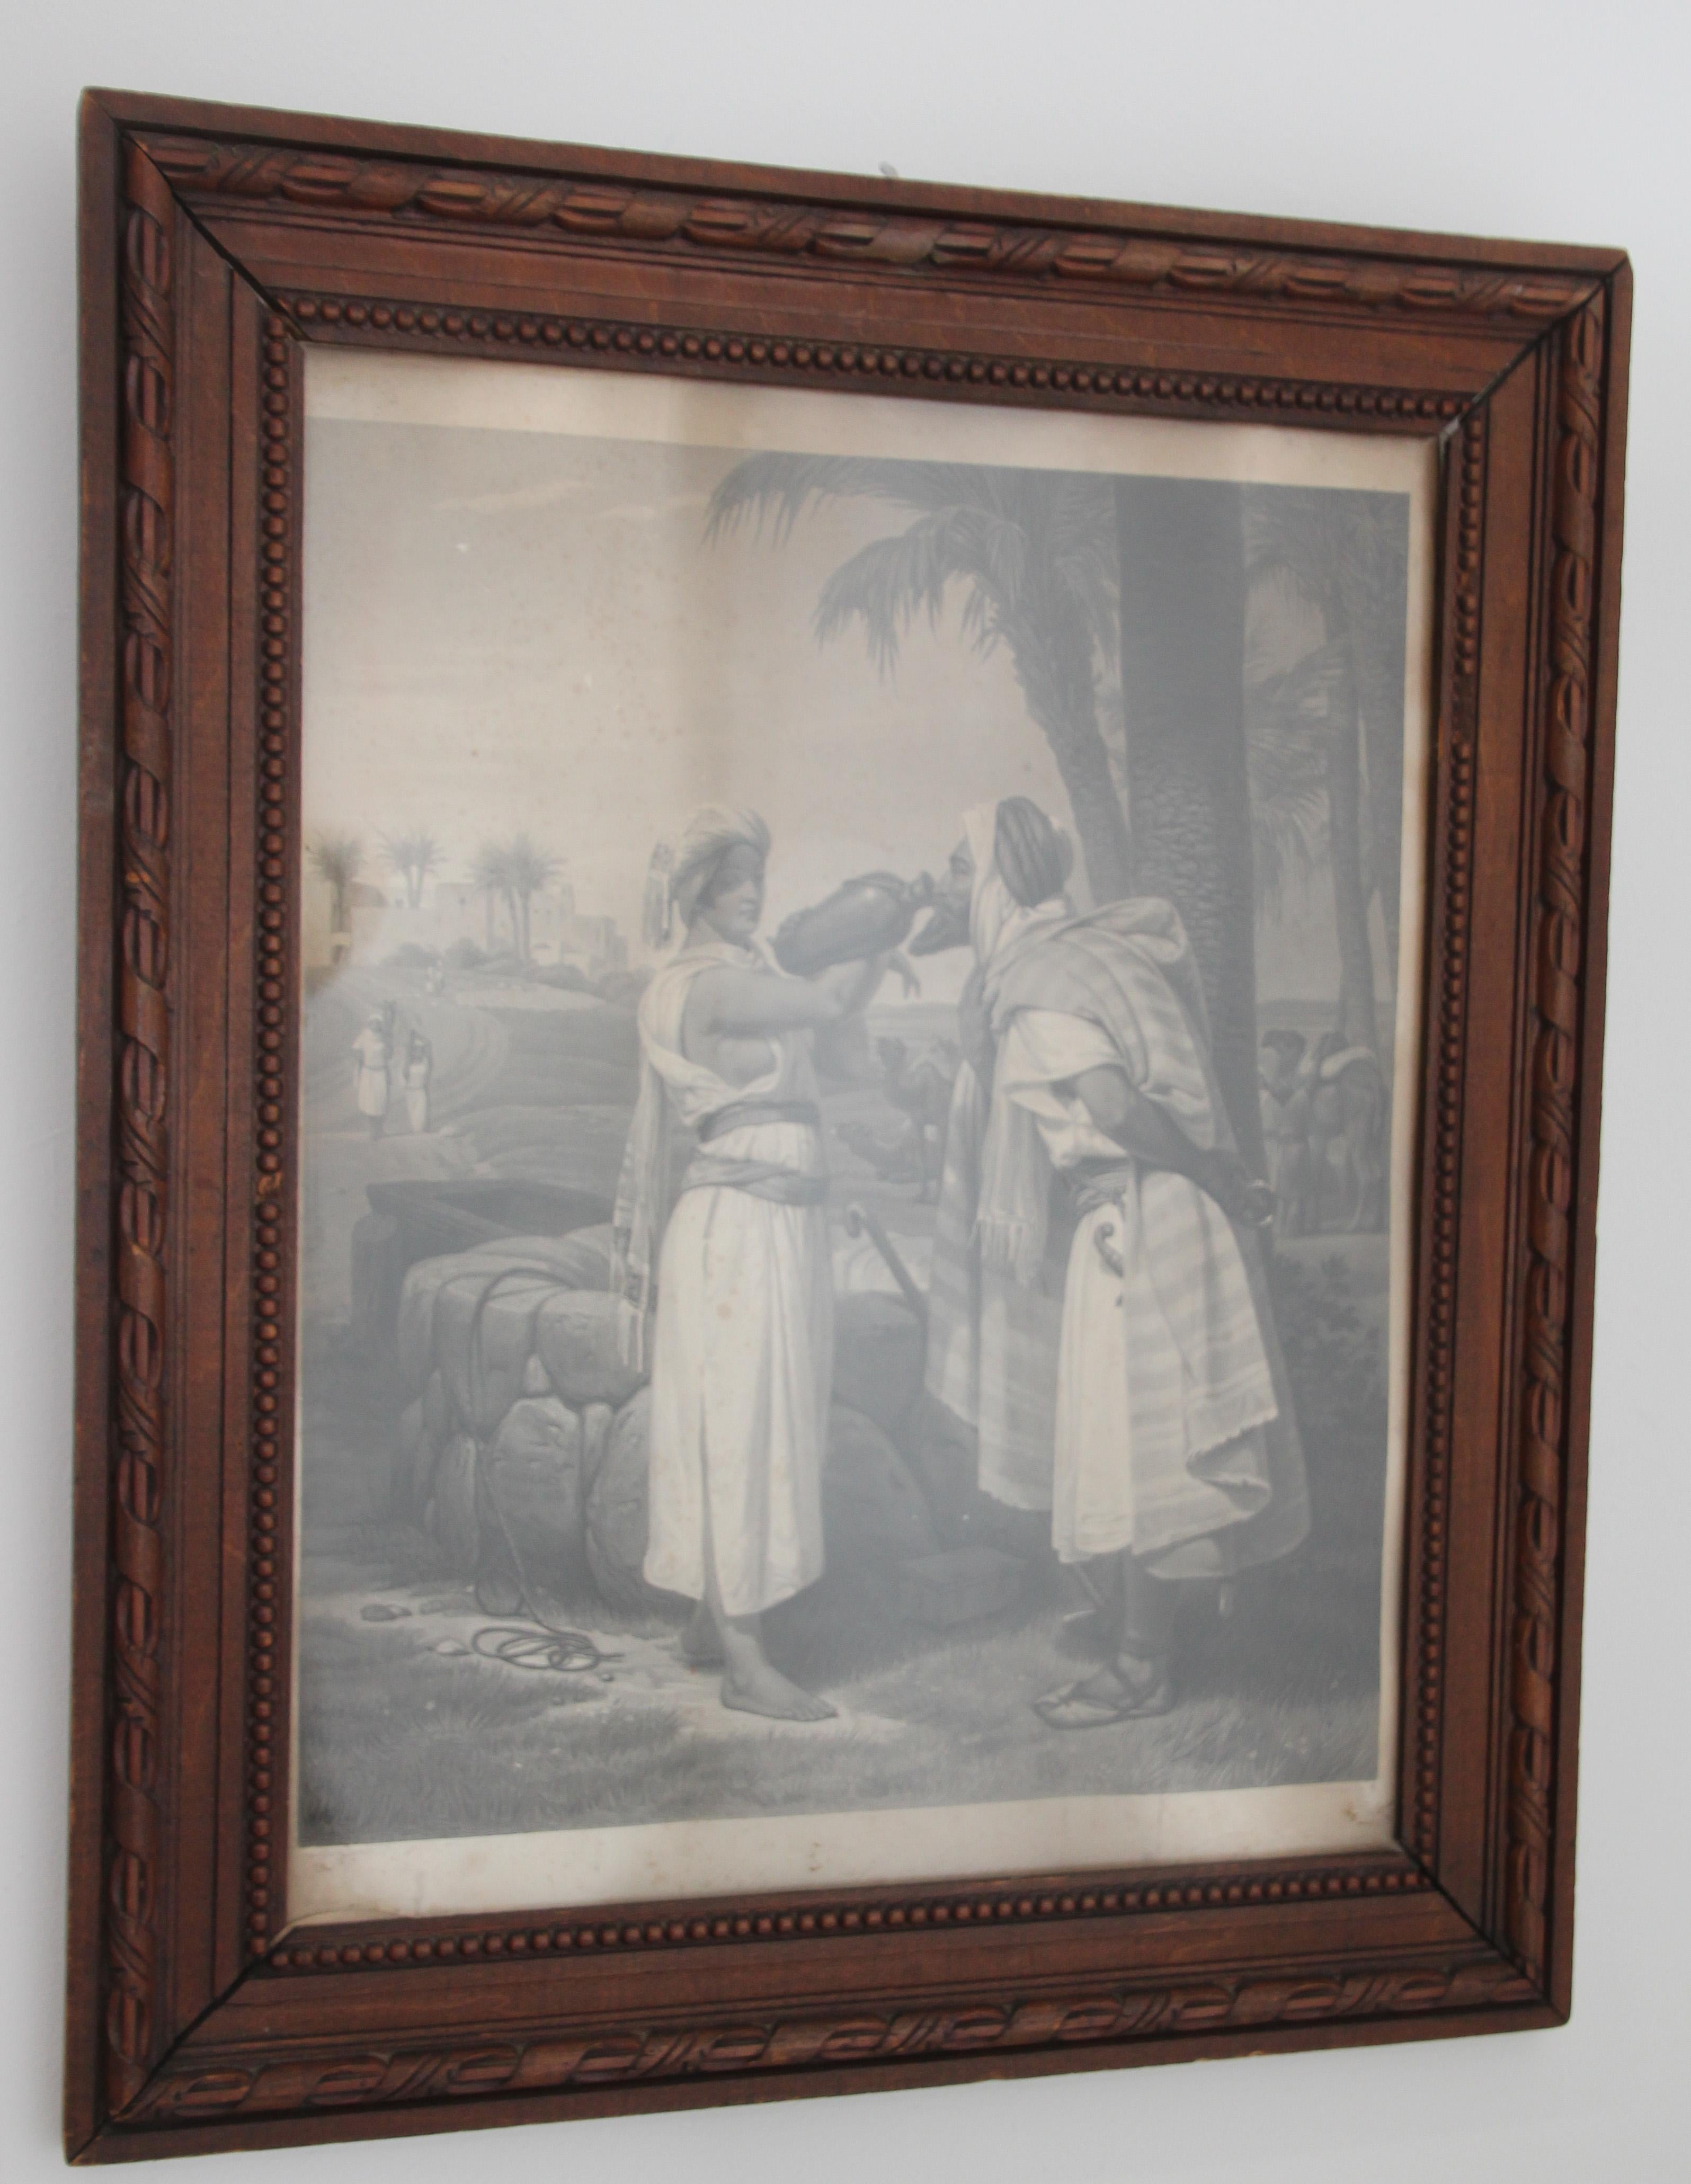 Orientalist engraving after Horace Vernet, wood frame, Empire period
Orientalist engraving depicting Rebecca at the Fountain giving a drink to a bedouin, early 19th century.
After the original painting of Horace Vernet (made in 1835 and now